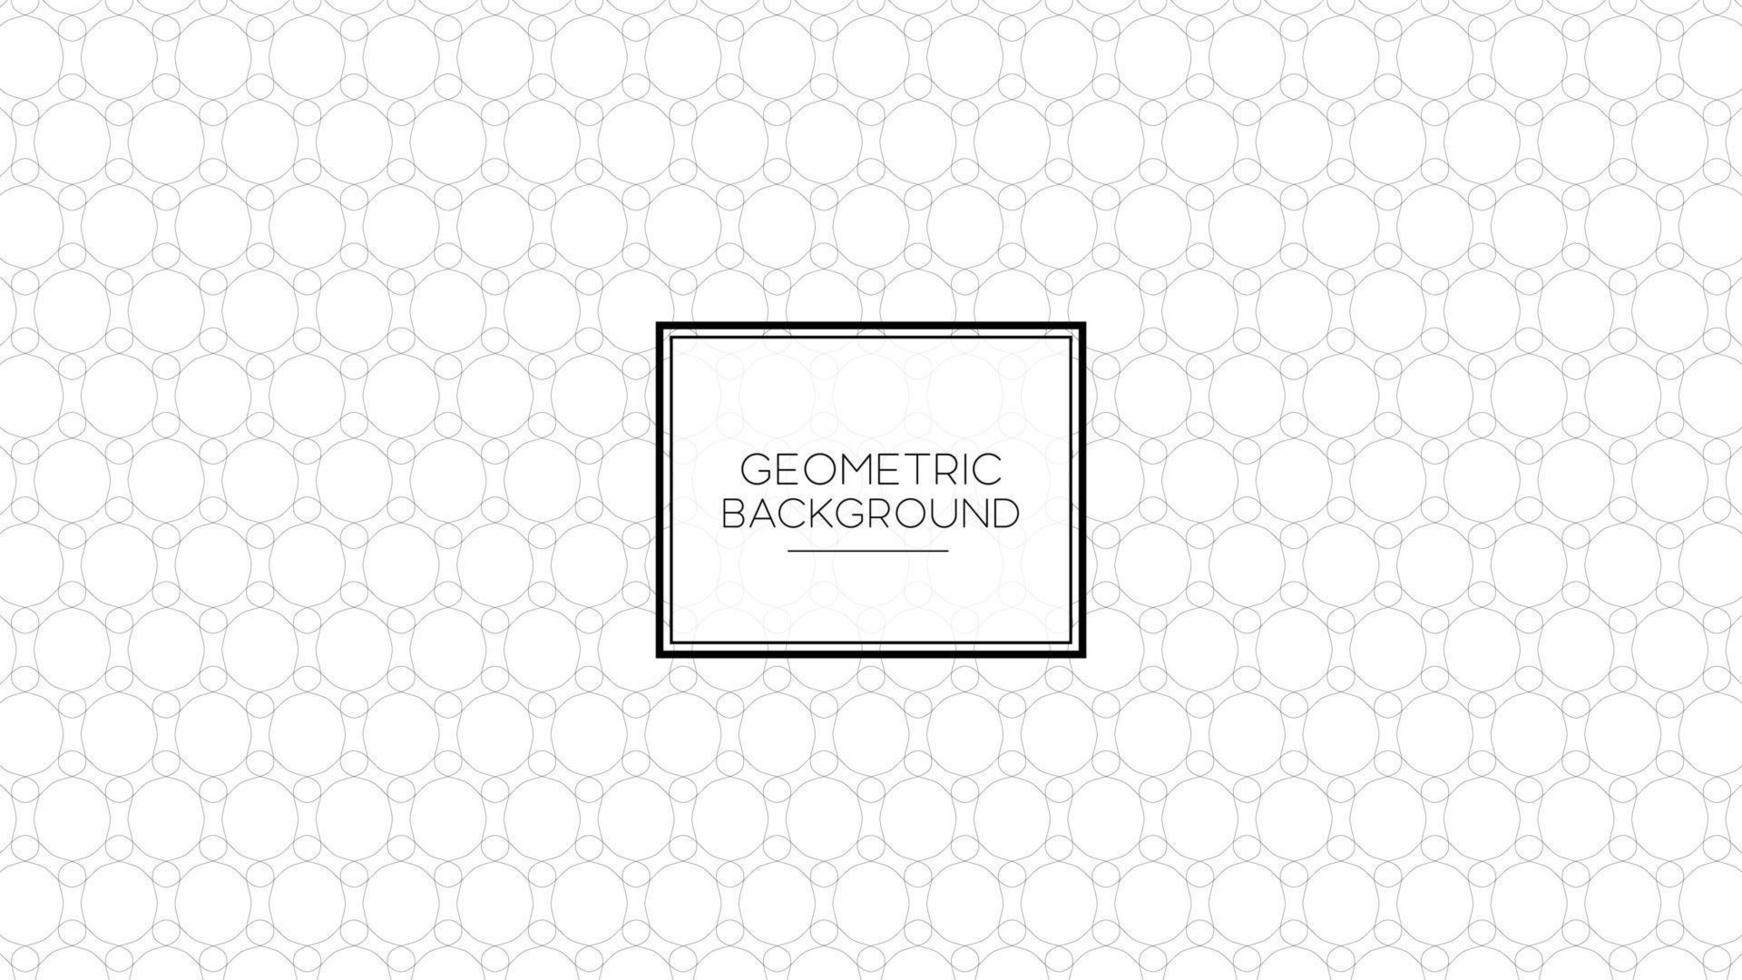 White background with black curved line shapes geometric shapes texture repeat pattern vector